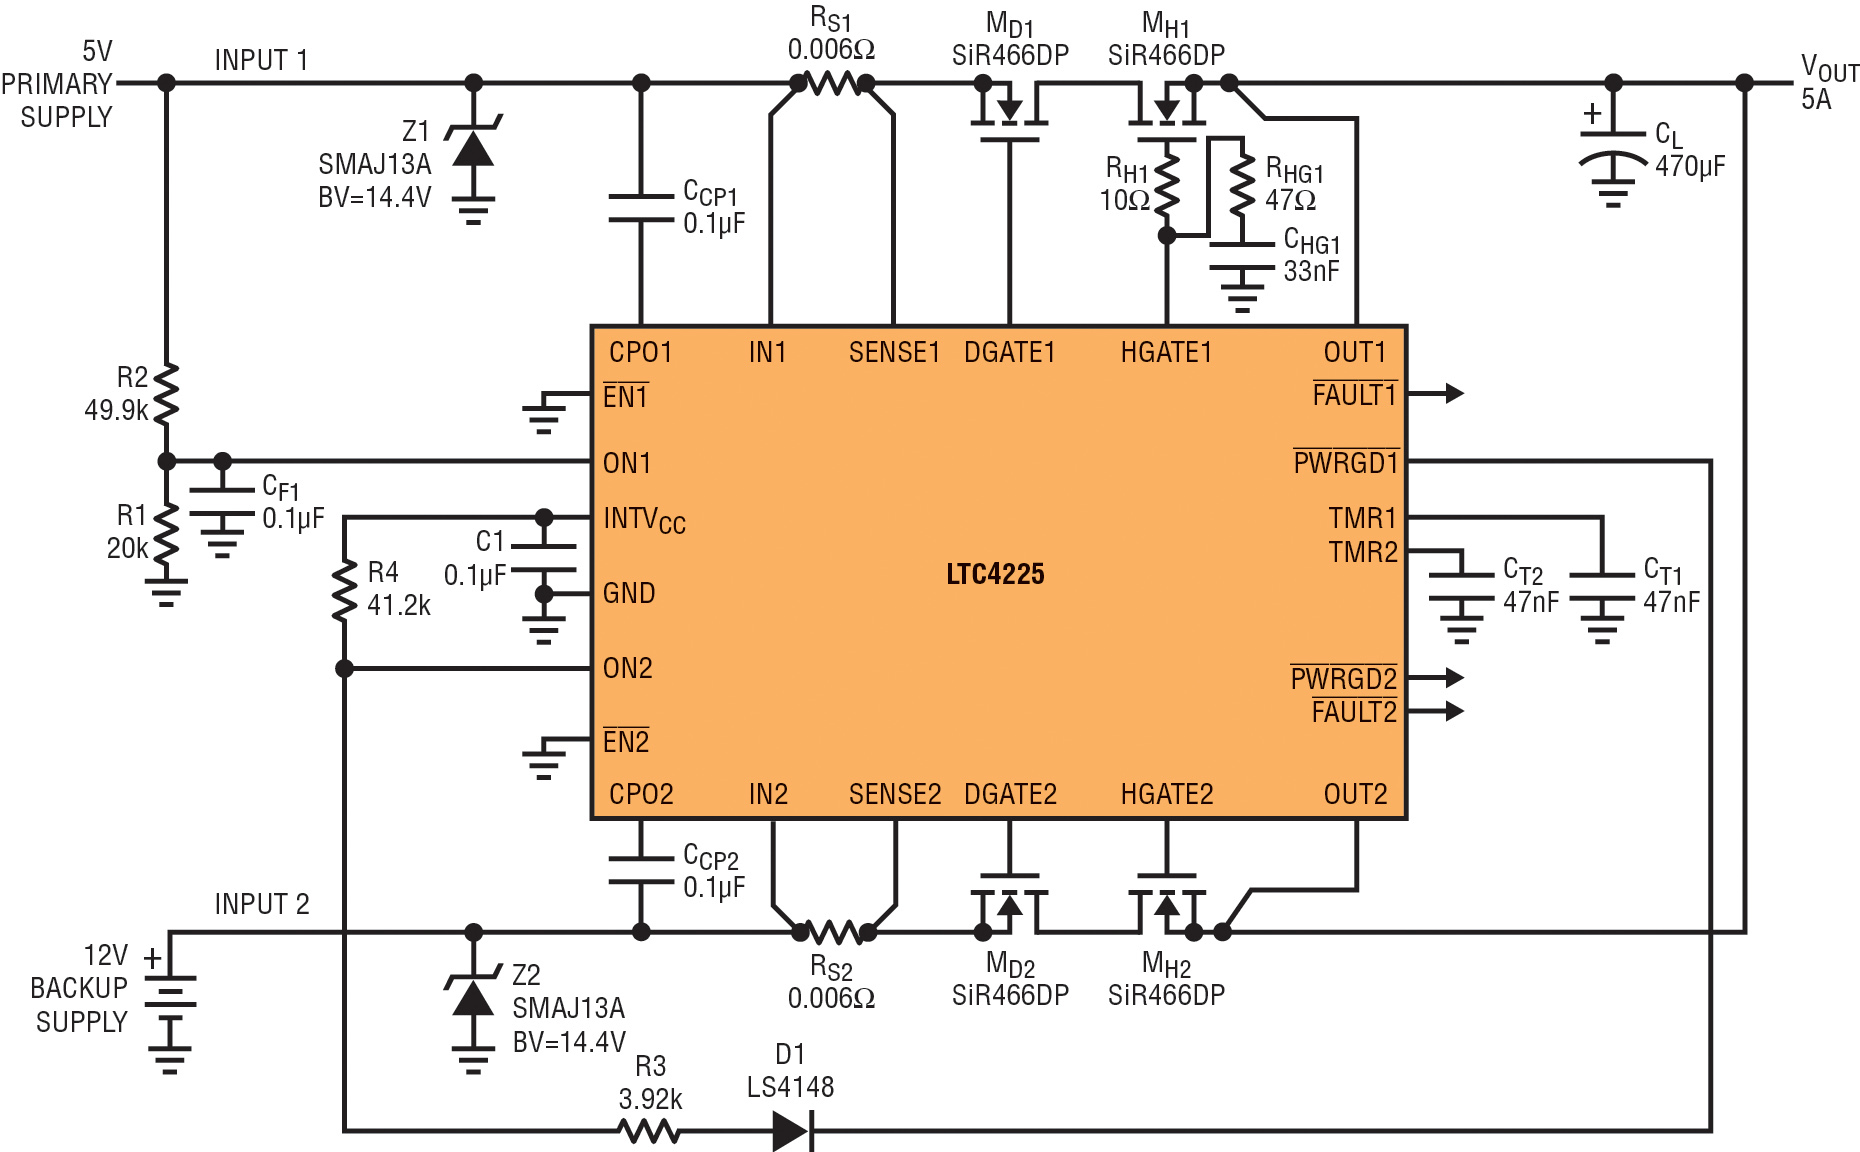 Figure 4 - LTC4225 for 2-channel power prioritiser with IN1 as the prioritising input